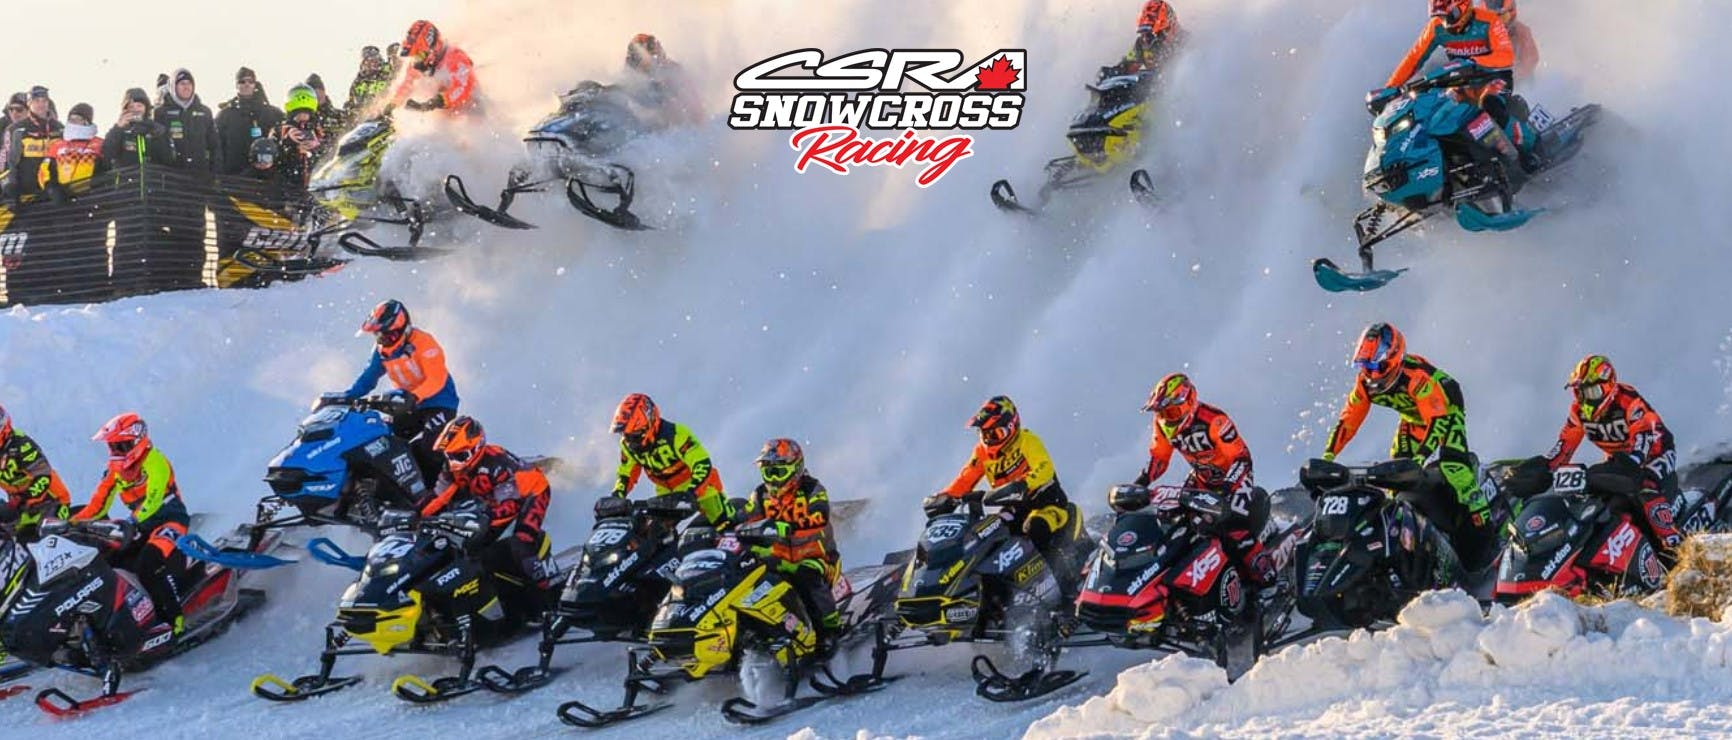 Snowmobile racers on their snowmobiles on course.